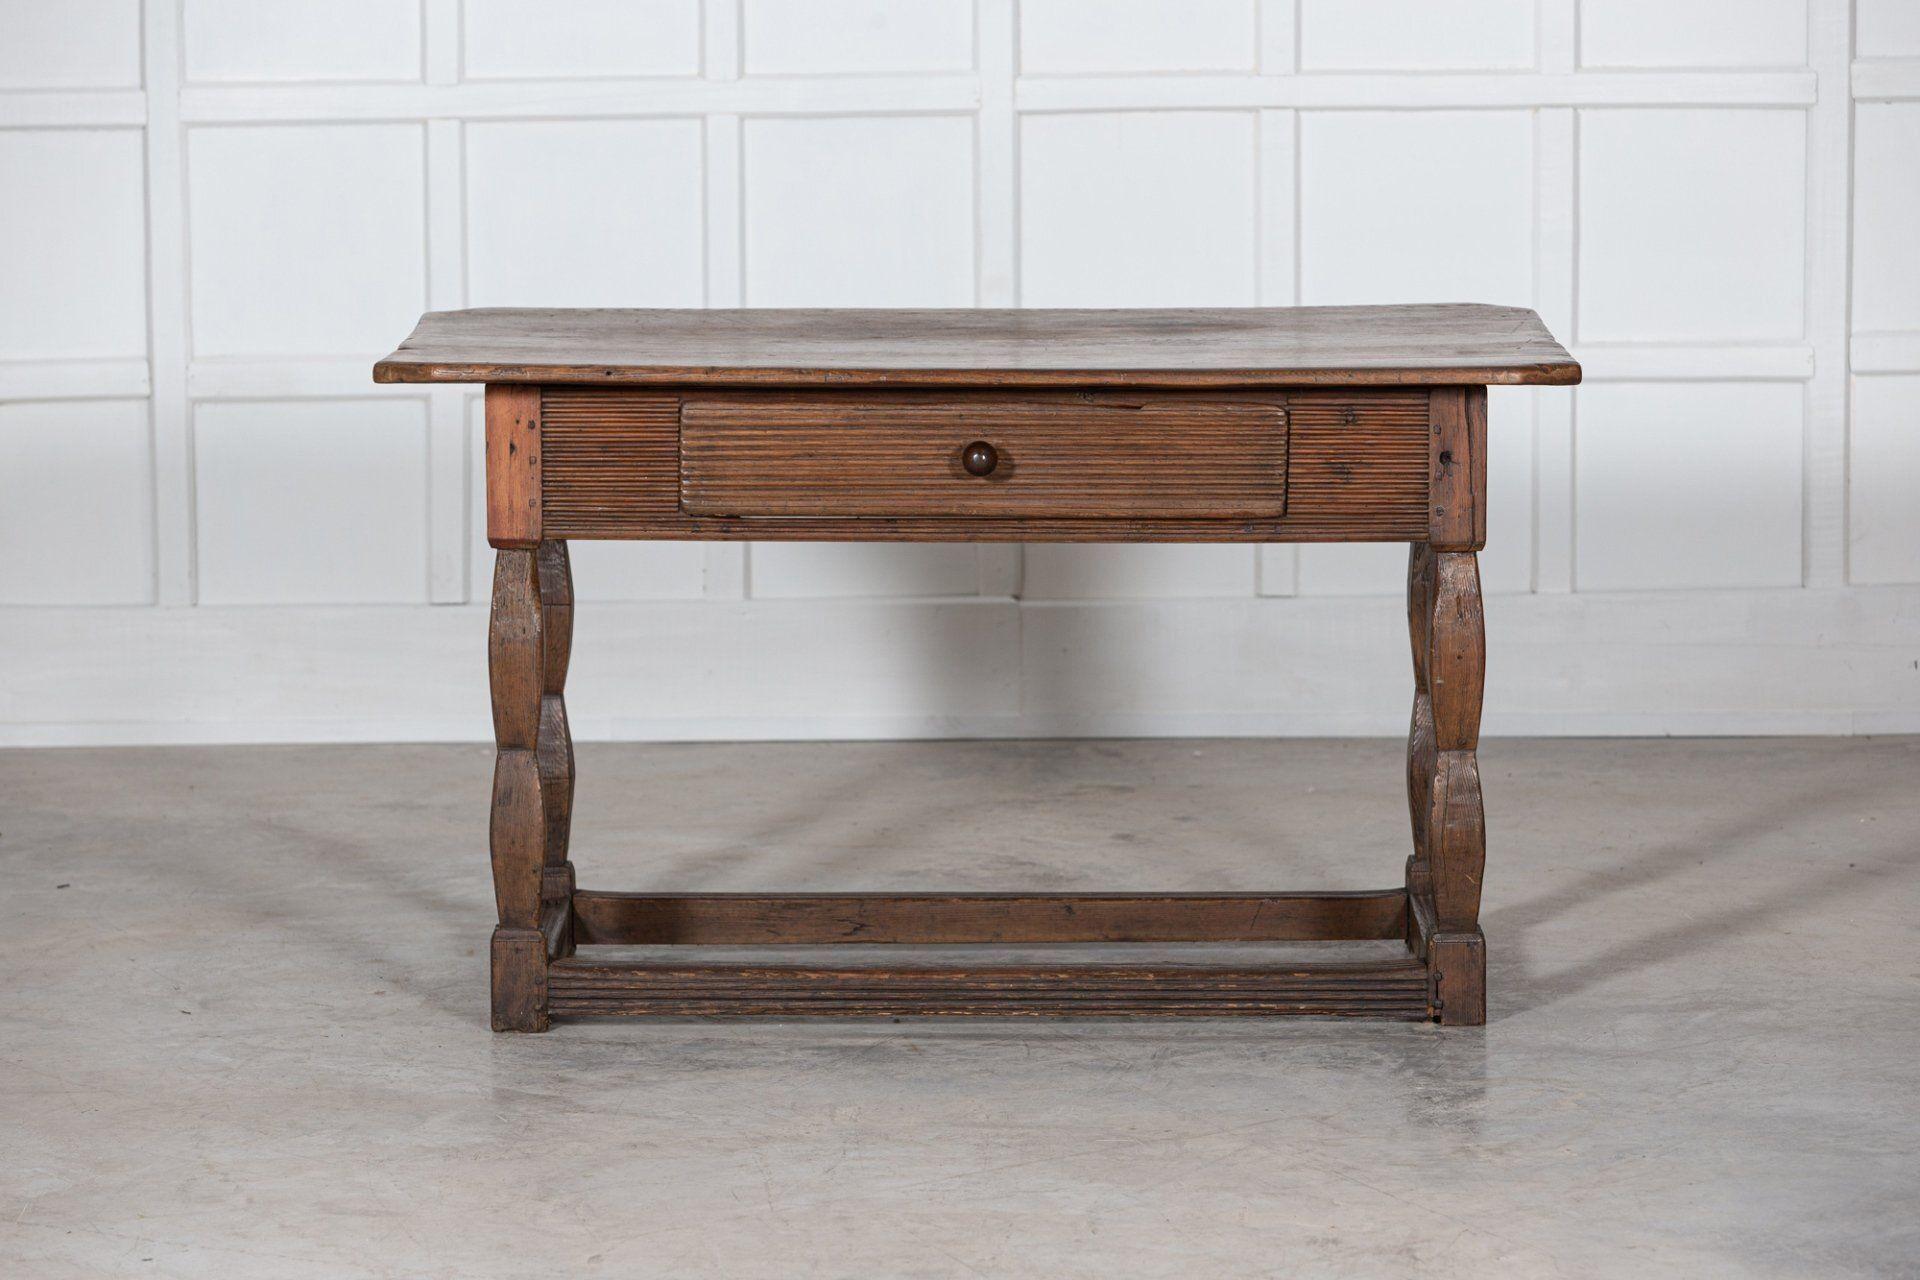 circa 1800
19thC Swedish Provincial Pine Refectory Table
Excellent form, wear and colour

W138 x D75 x H79 cm.